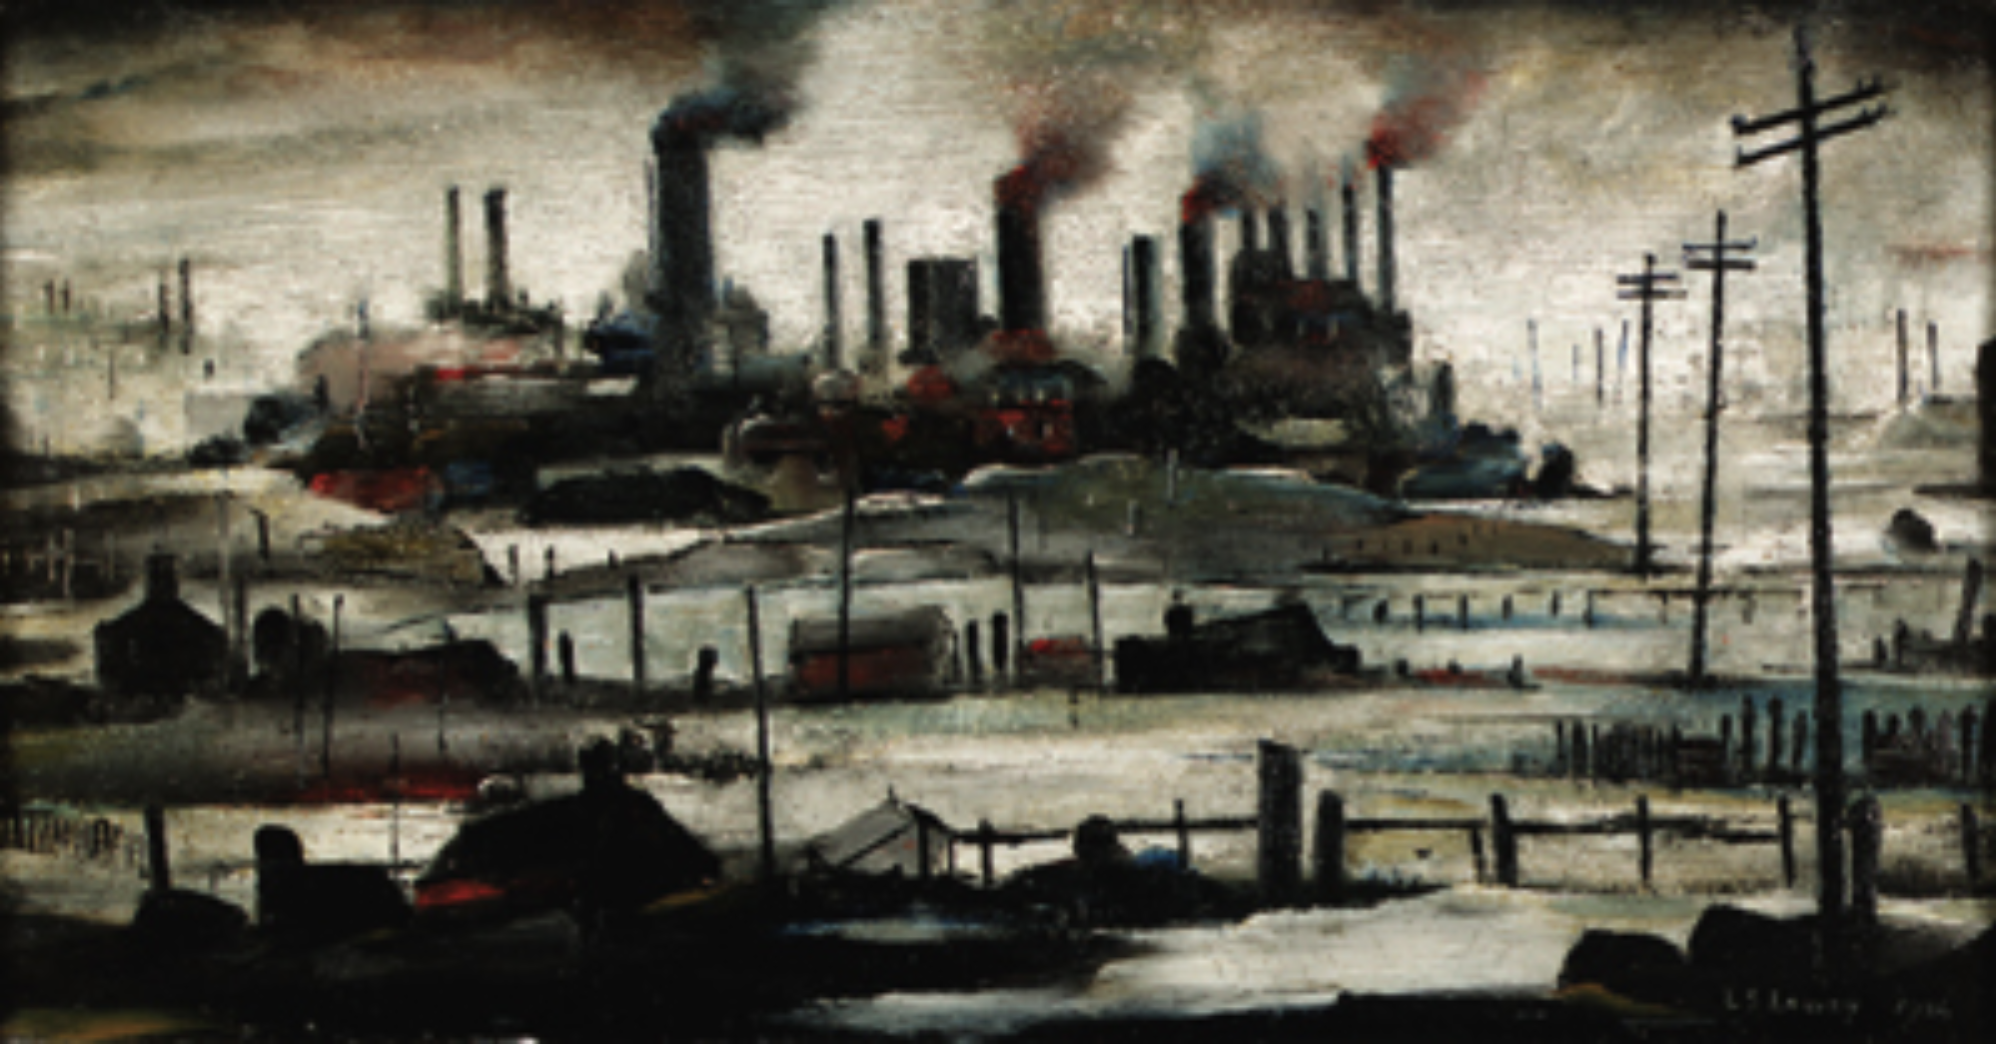 Industrial Landscape (1936) by Laurence Stephen Lowry (1887 - 1976), English artist.